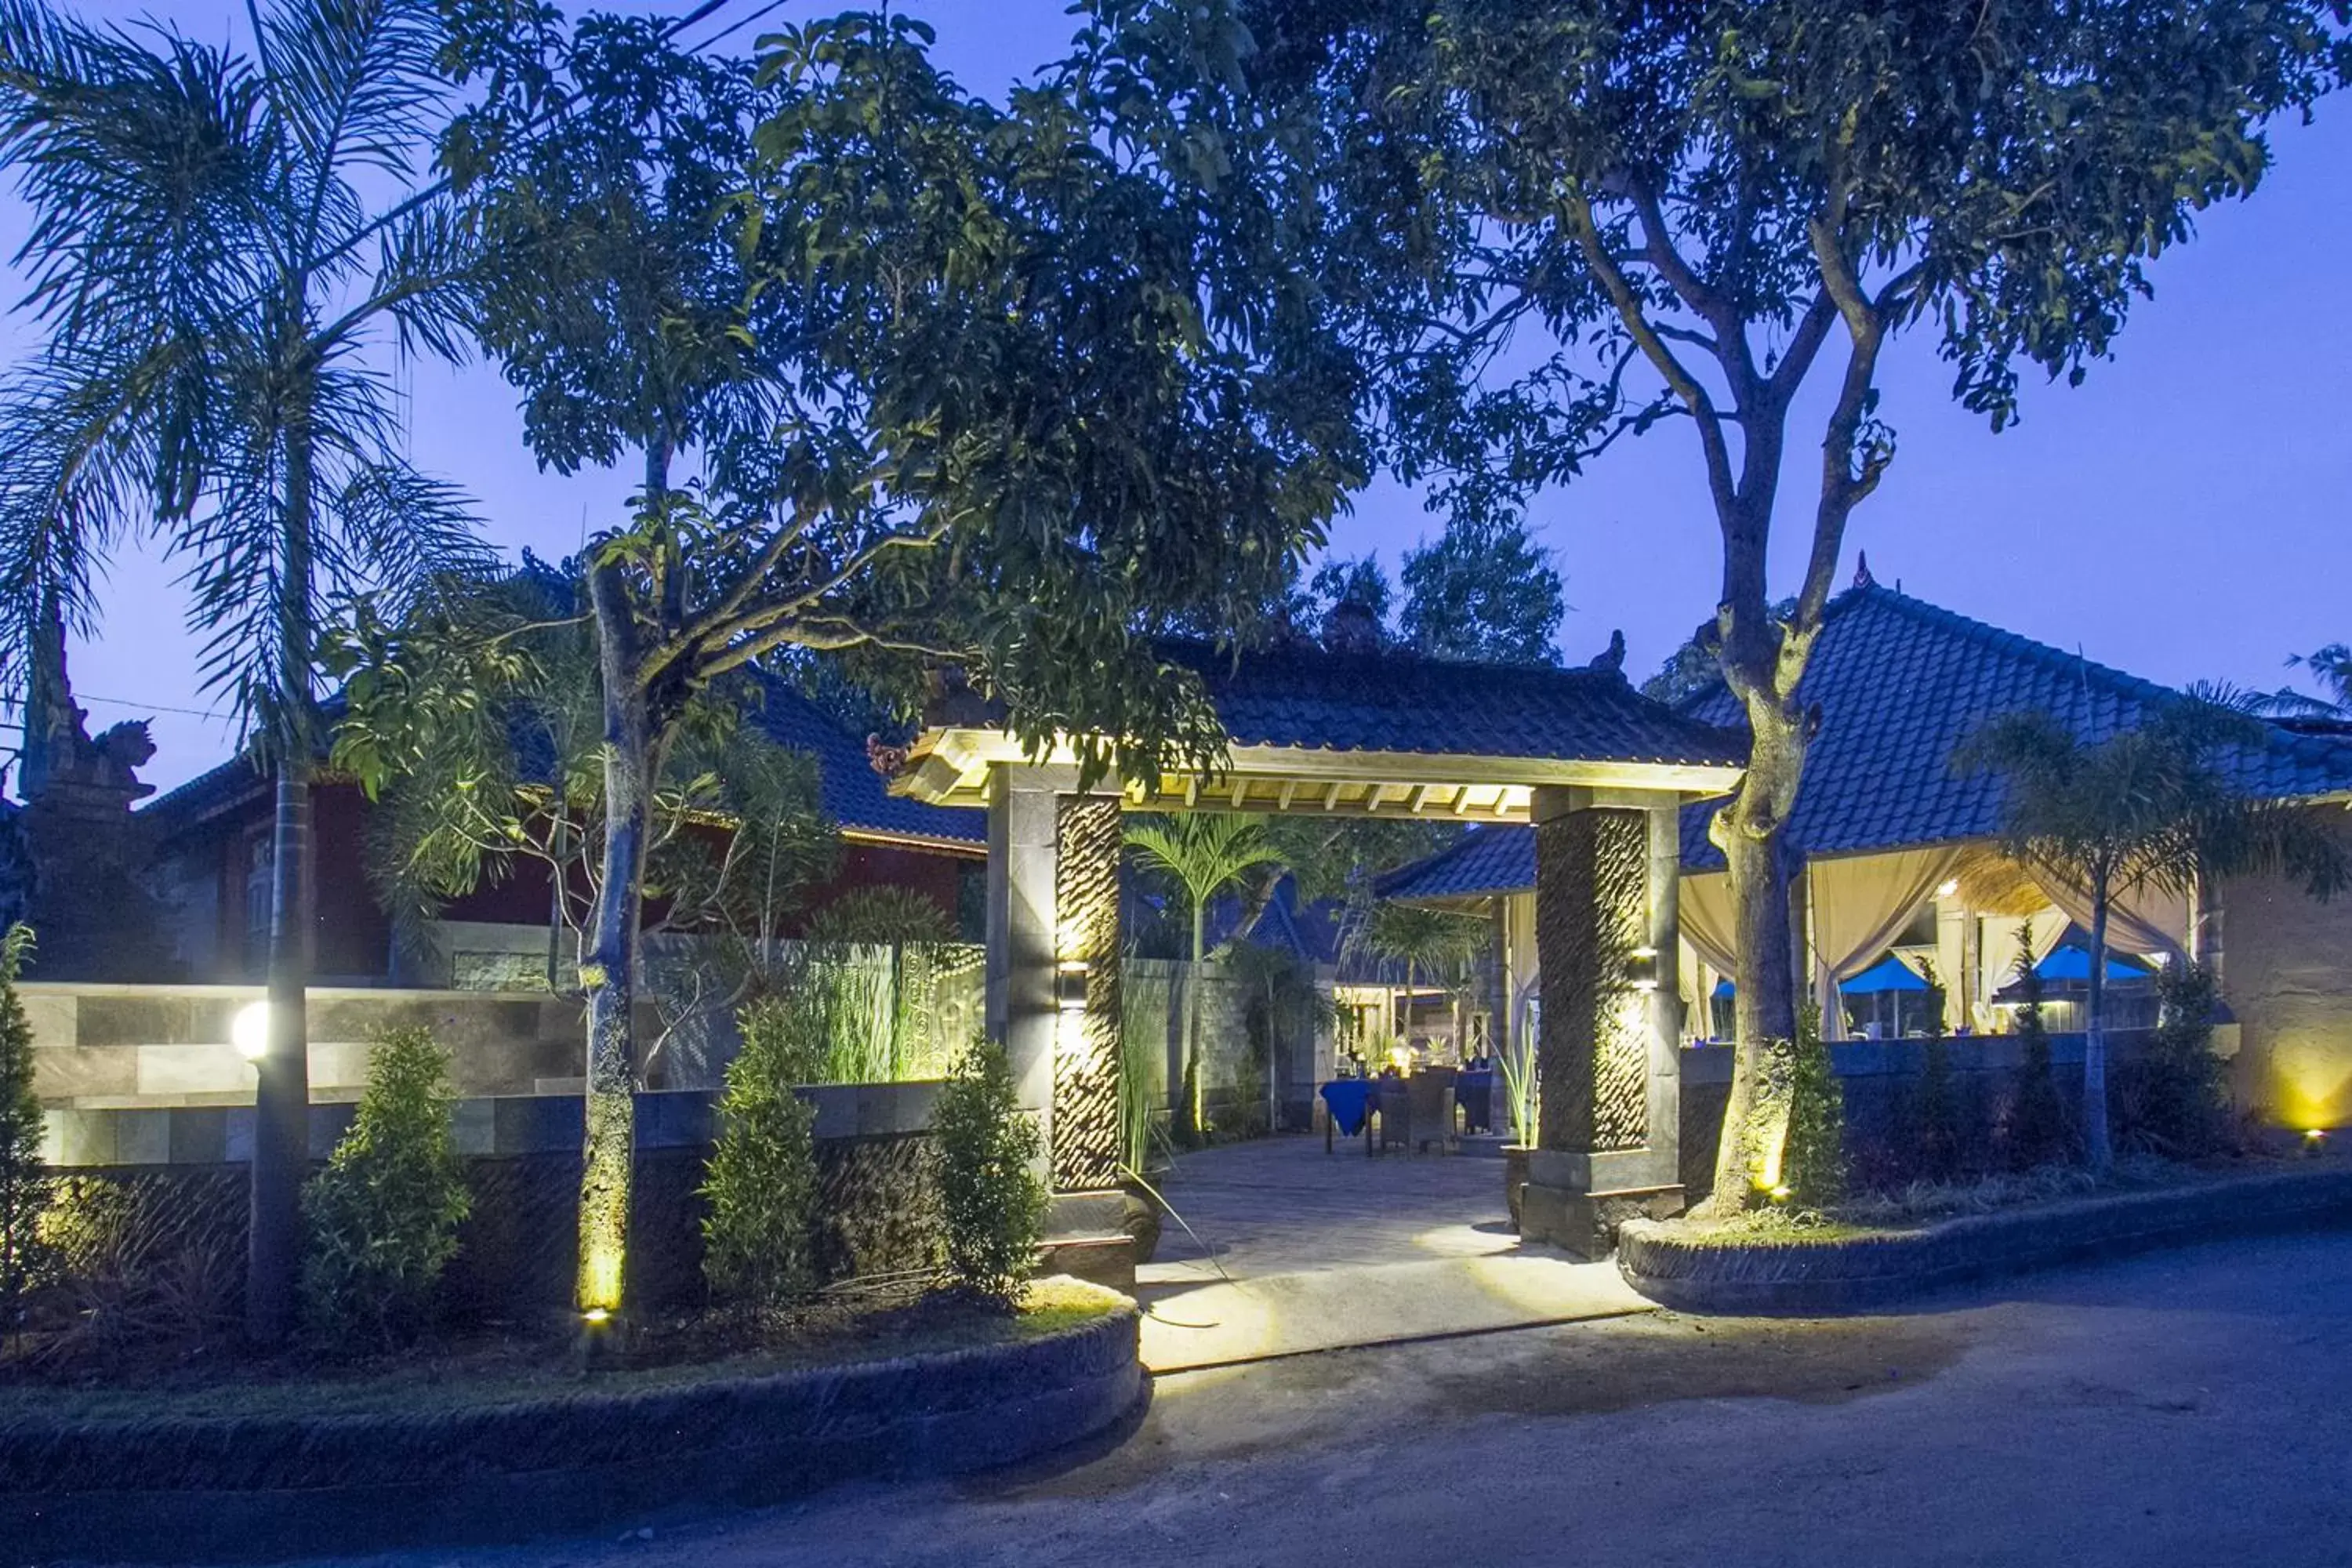 Property Building in The Palm Grove Villas